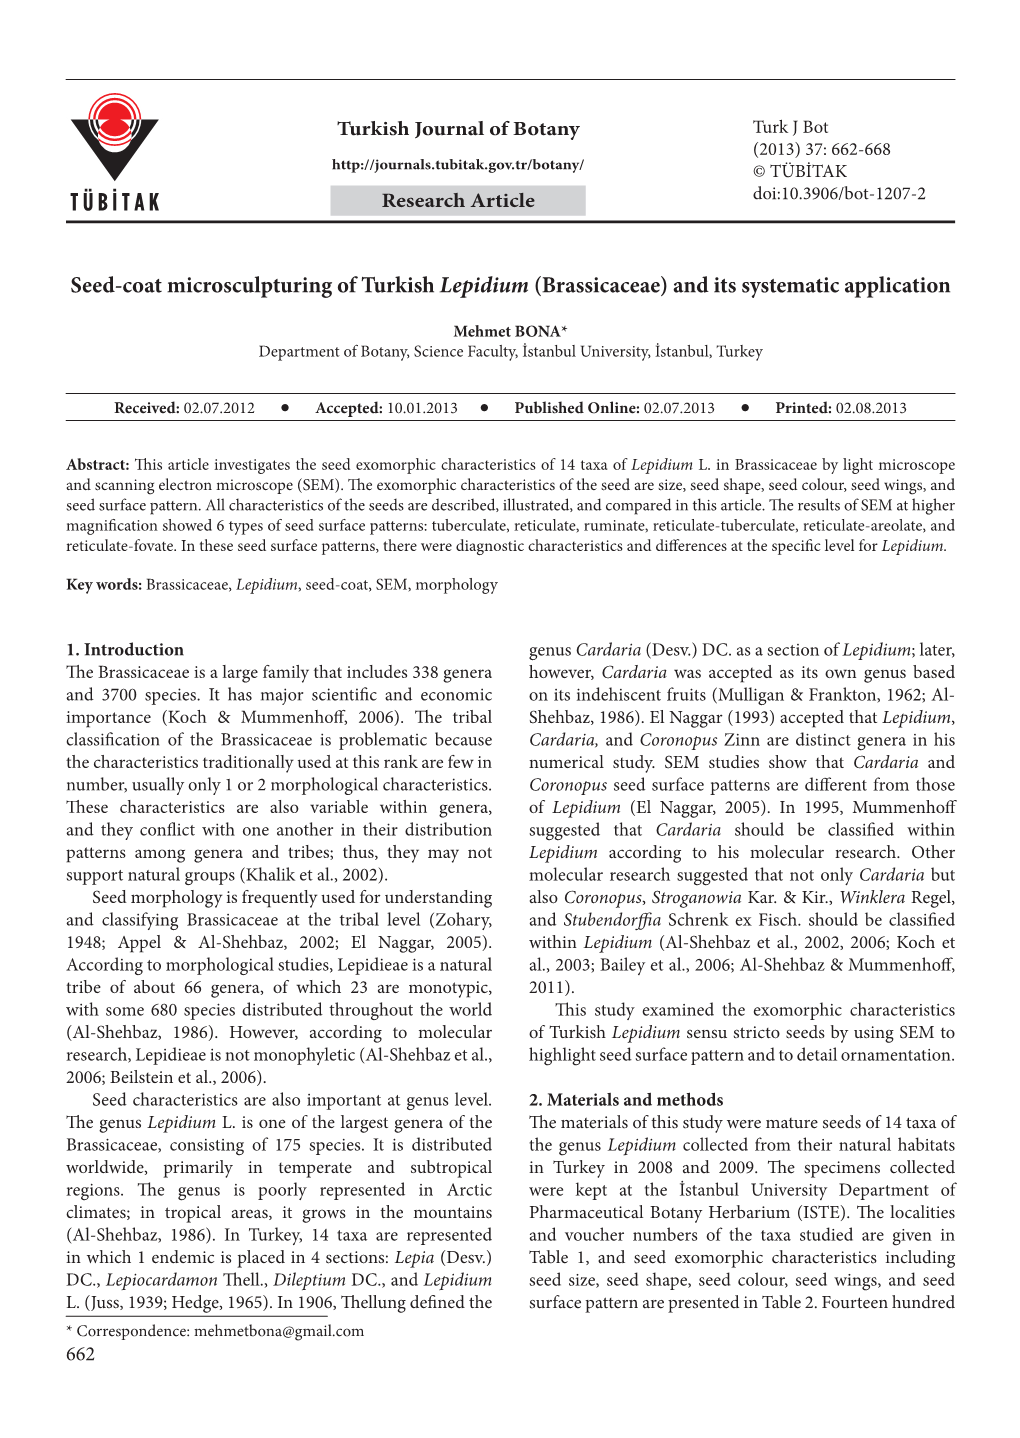 Seed-Coat Microsculpturing of Turkish Lepidium (Brassicaceae) and Its Systematic Application